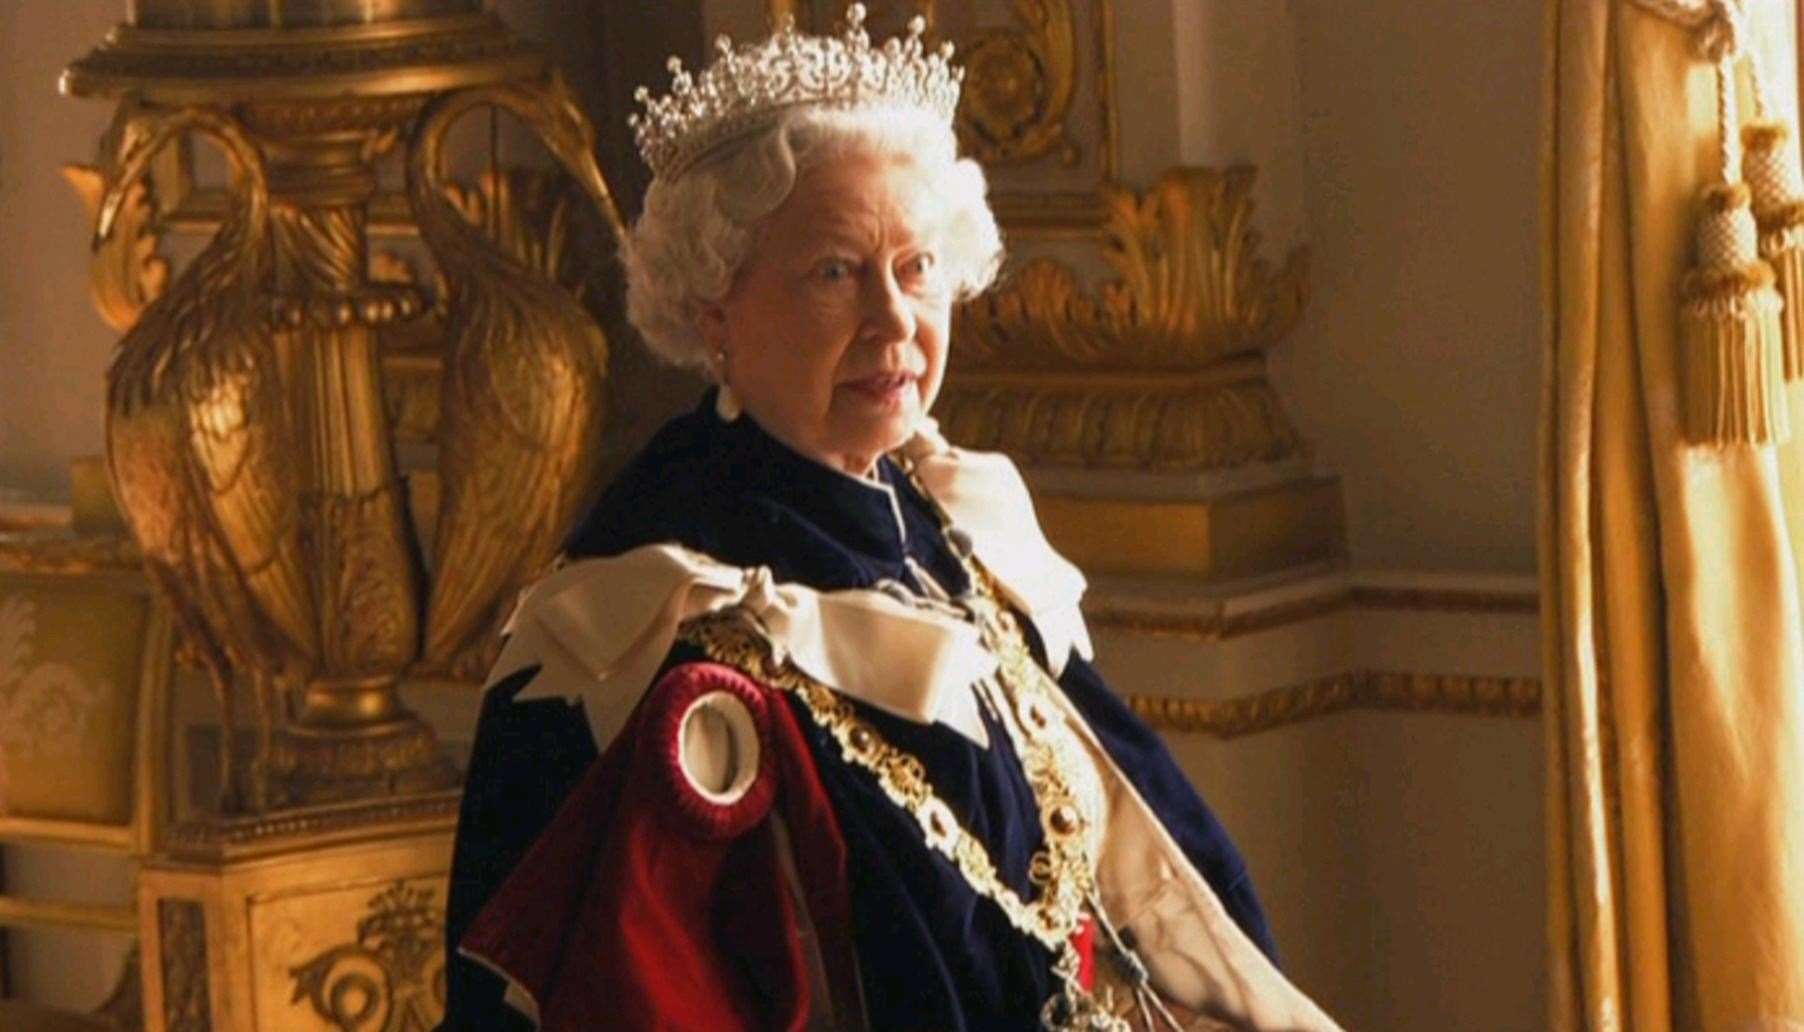 The Queen’s reaction during BBC One’s A Year With The Queen programme during her photoshoot with Annie Leibovitz (BBC One/PA)